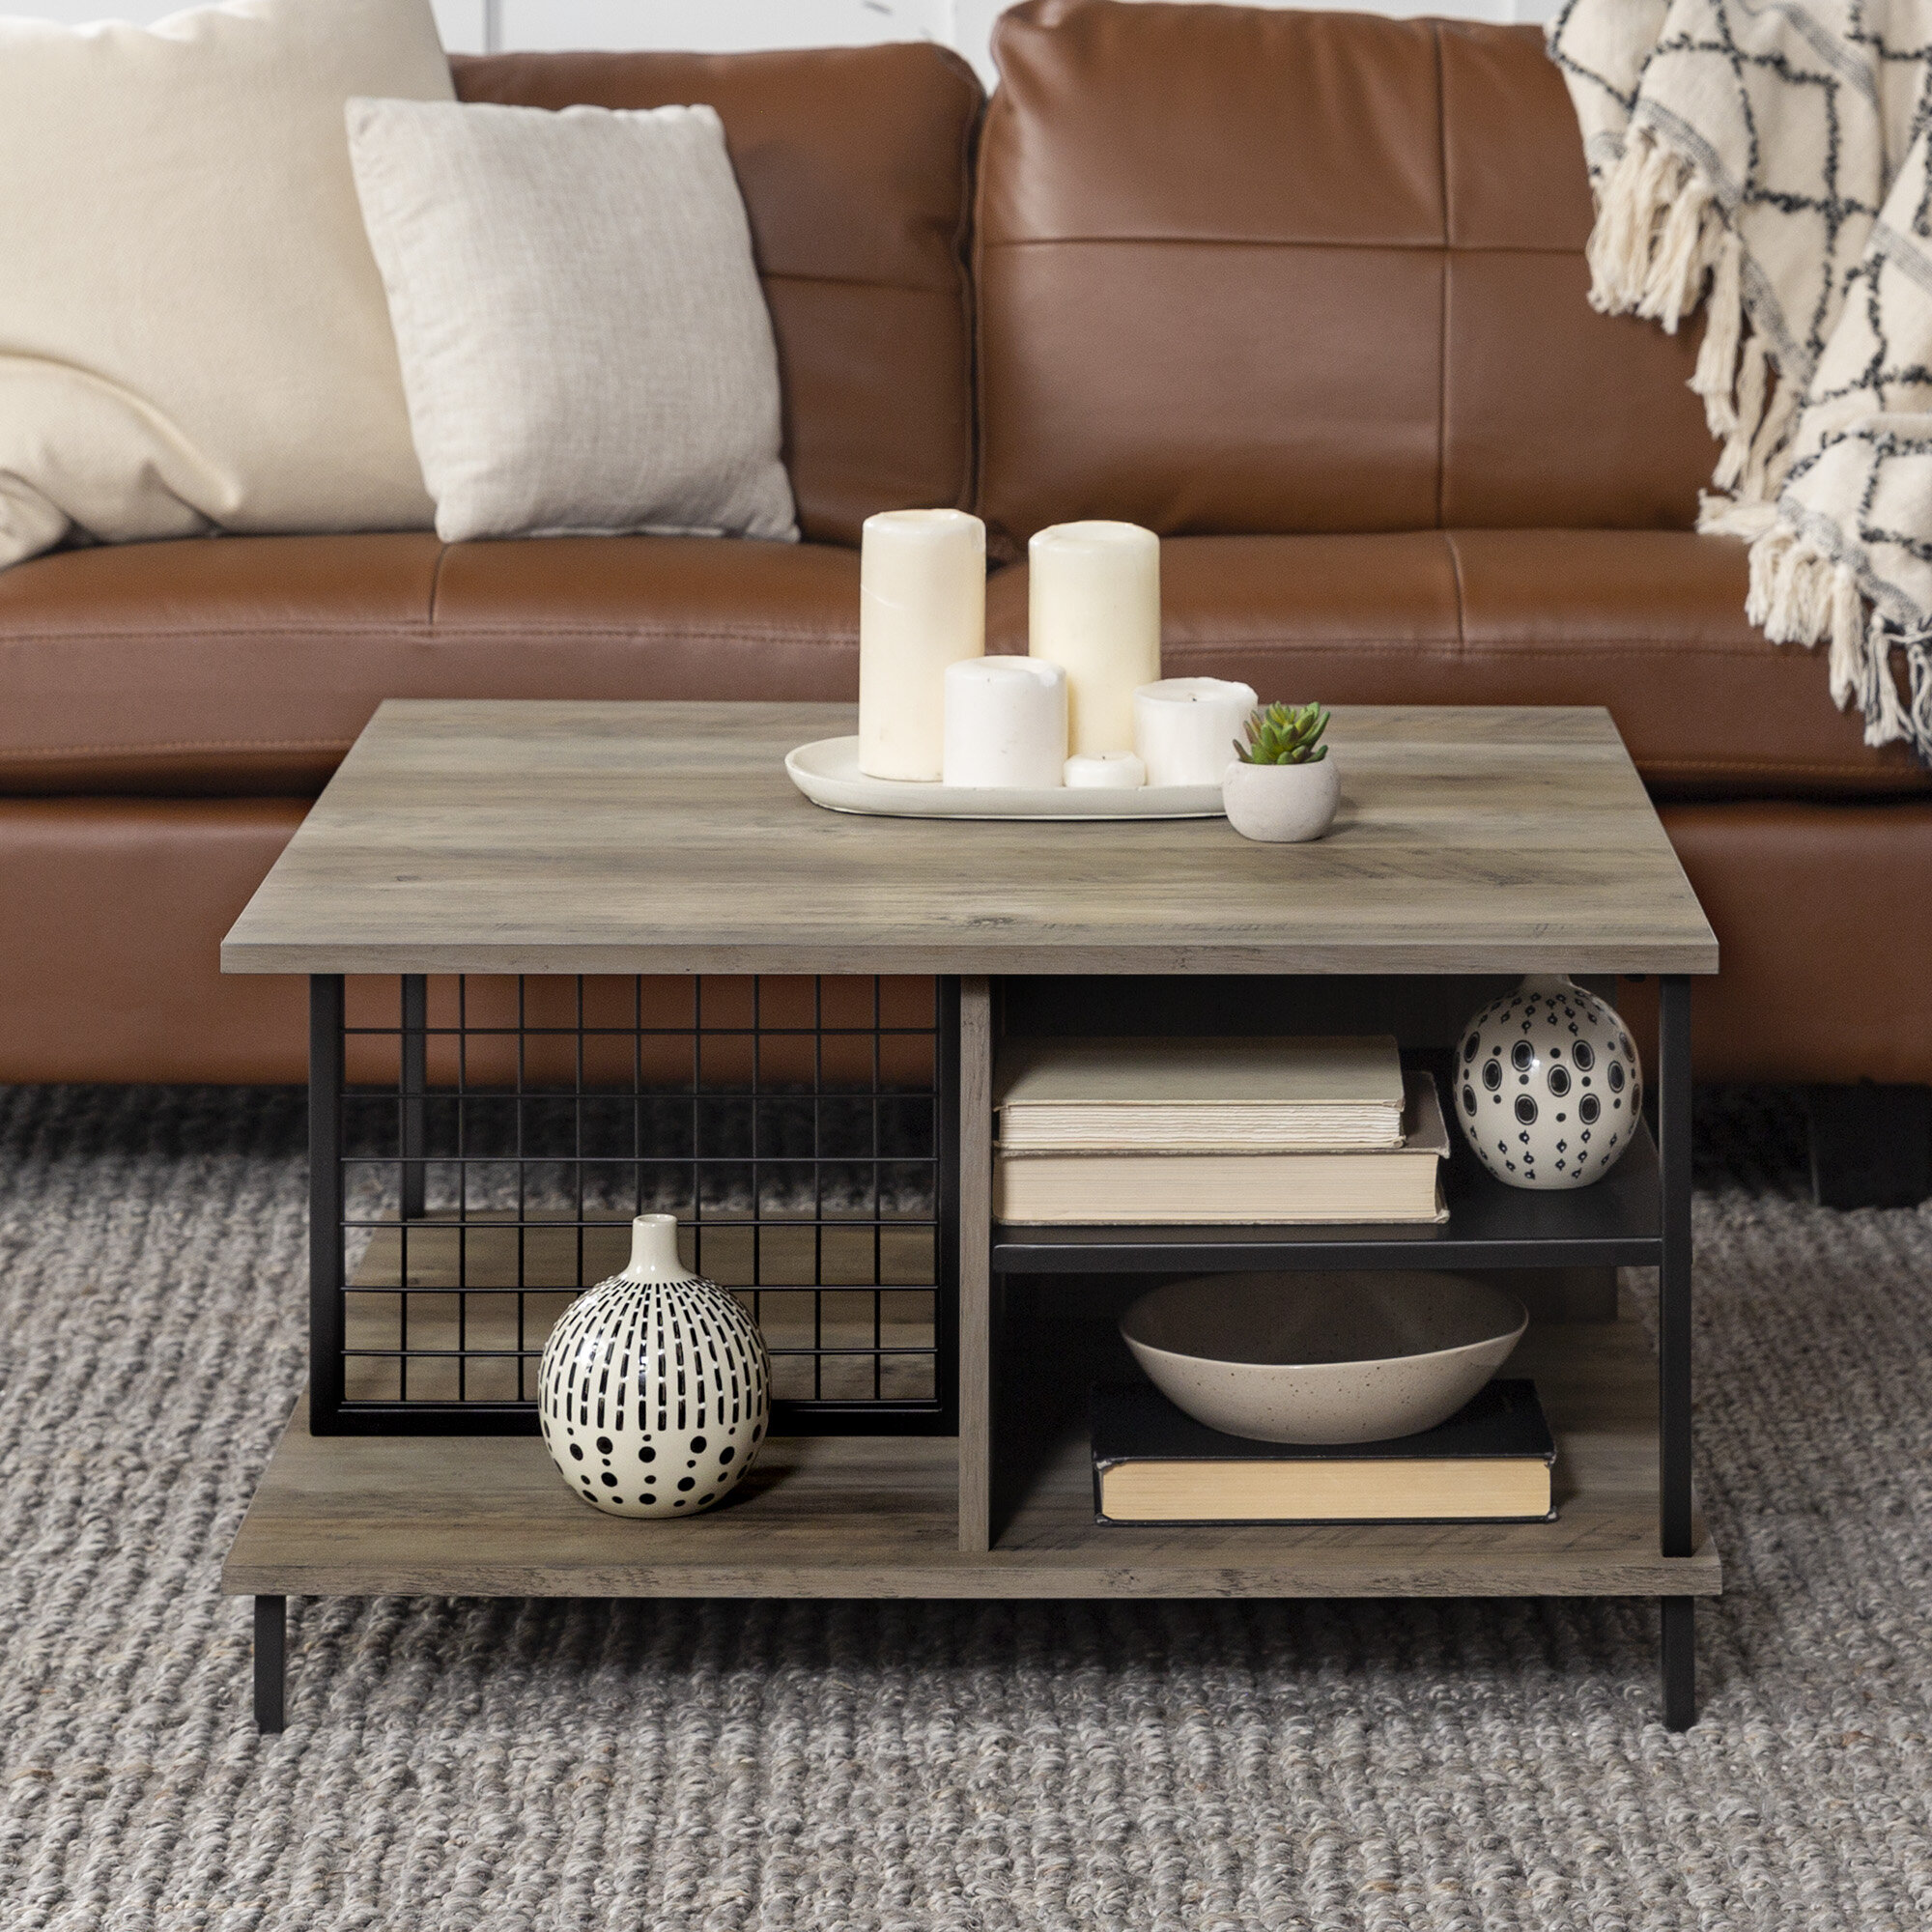 Small Coffee Tables Up To 65 Off Through 03 16 Wayfair